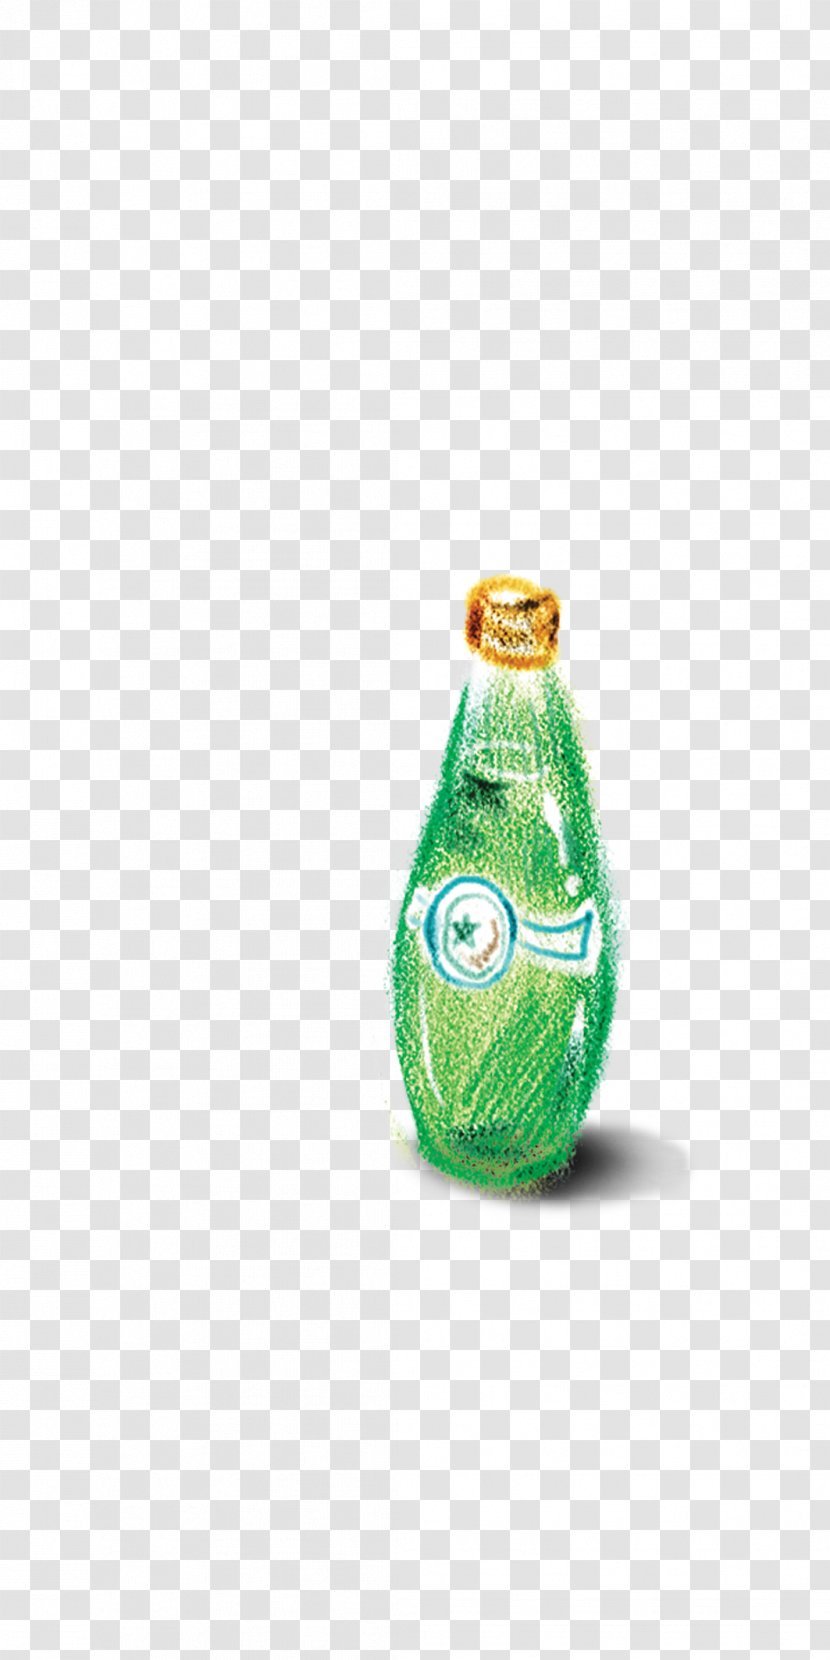 Glass Bottle - Paint - Hand-painted Beer Bottles Transparent PNG